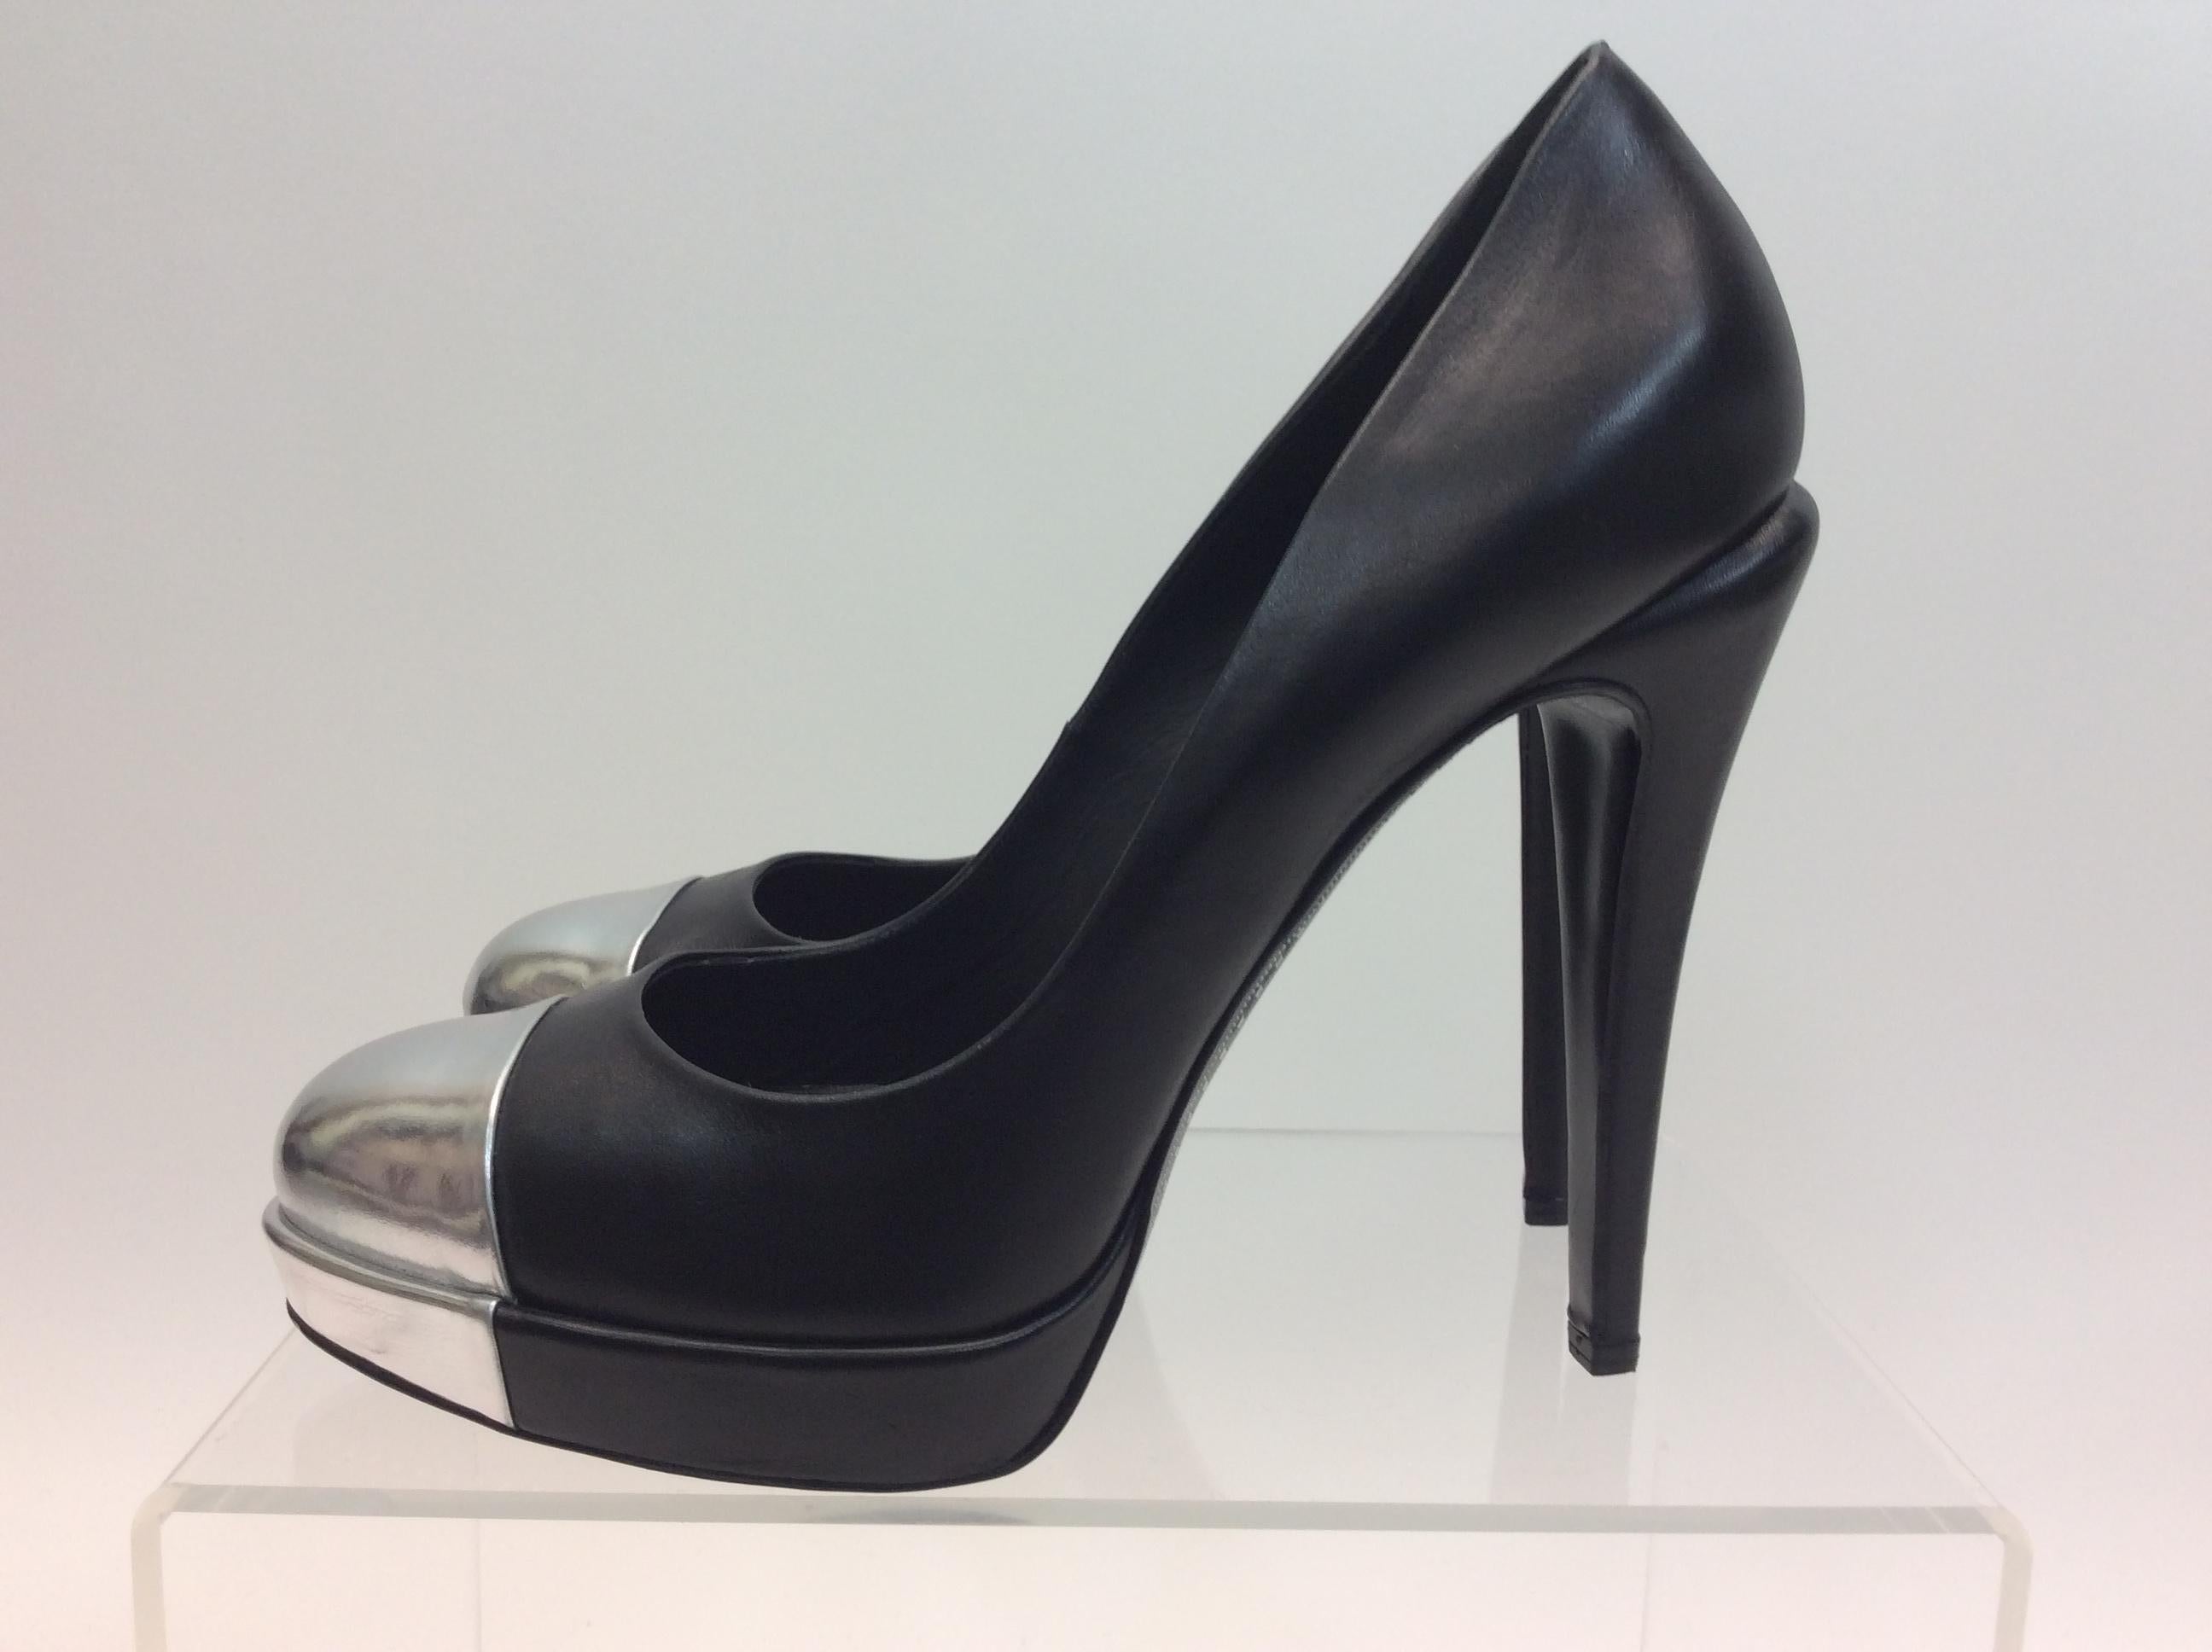 Chanel Black Leather and Silver Pump
$750
Made in Italy
Leather
Size 39.5
.75